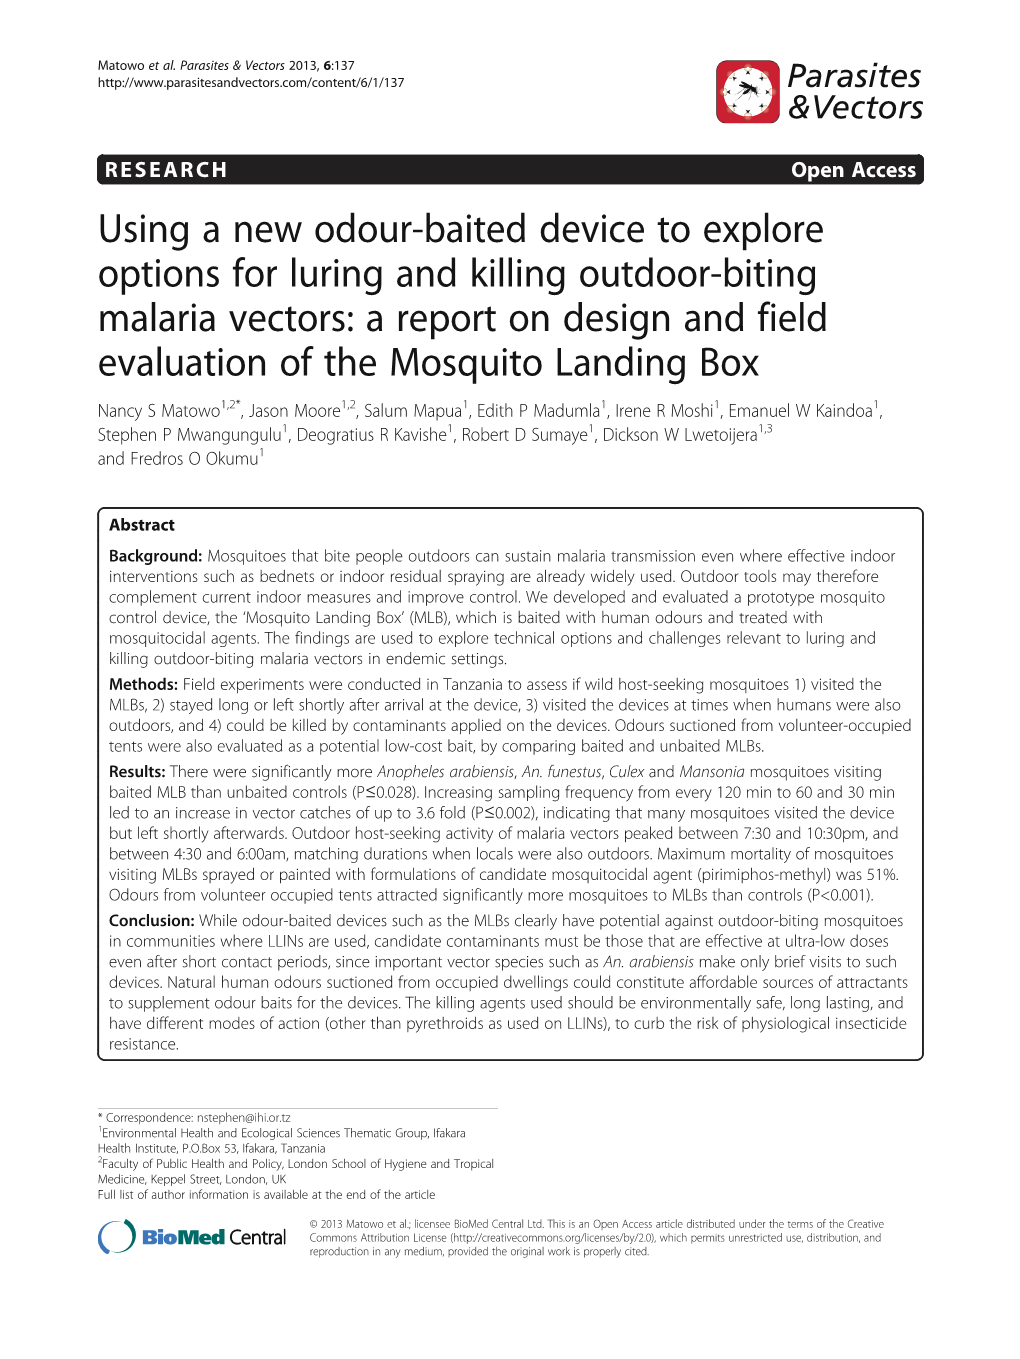 Using a New Odour-Baited Device to Explore Options for Luring and Killing Outdoor-Biting Malaria Vectors